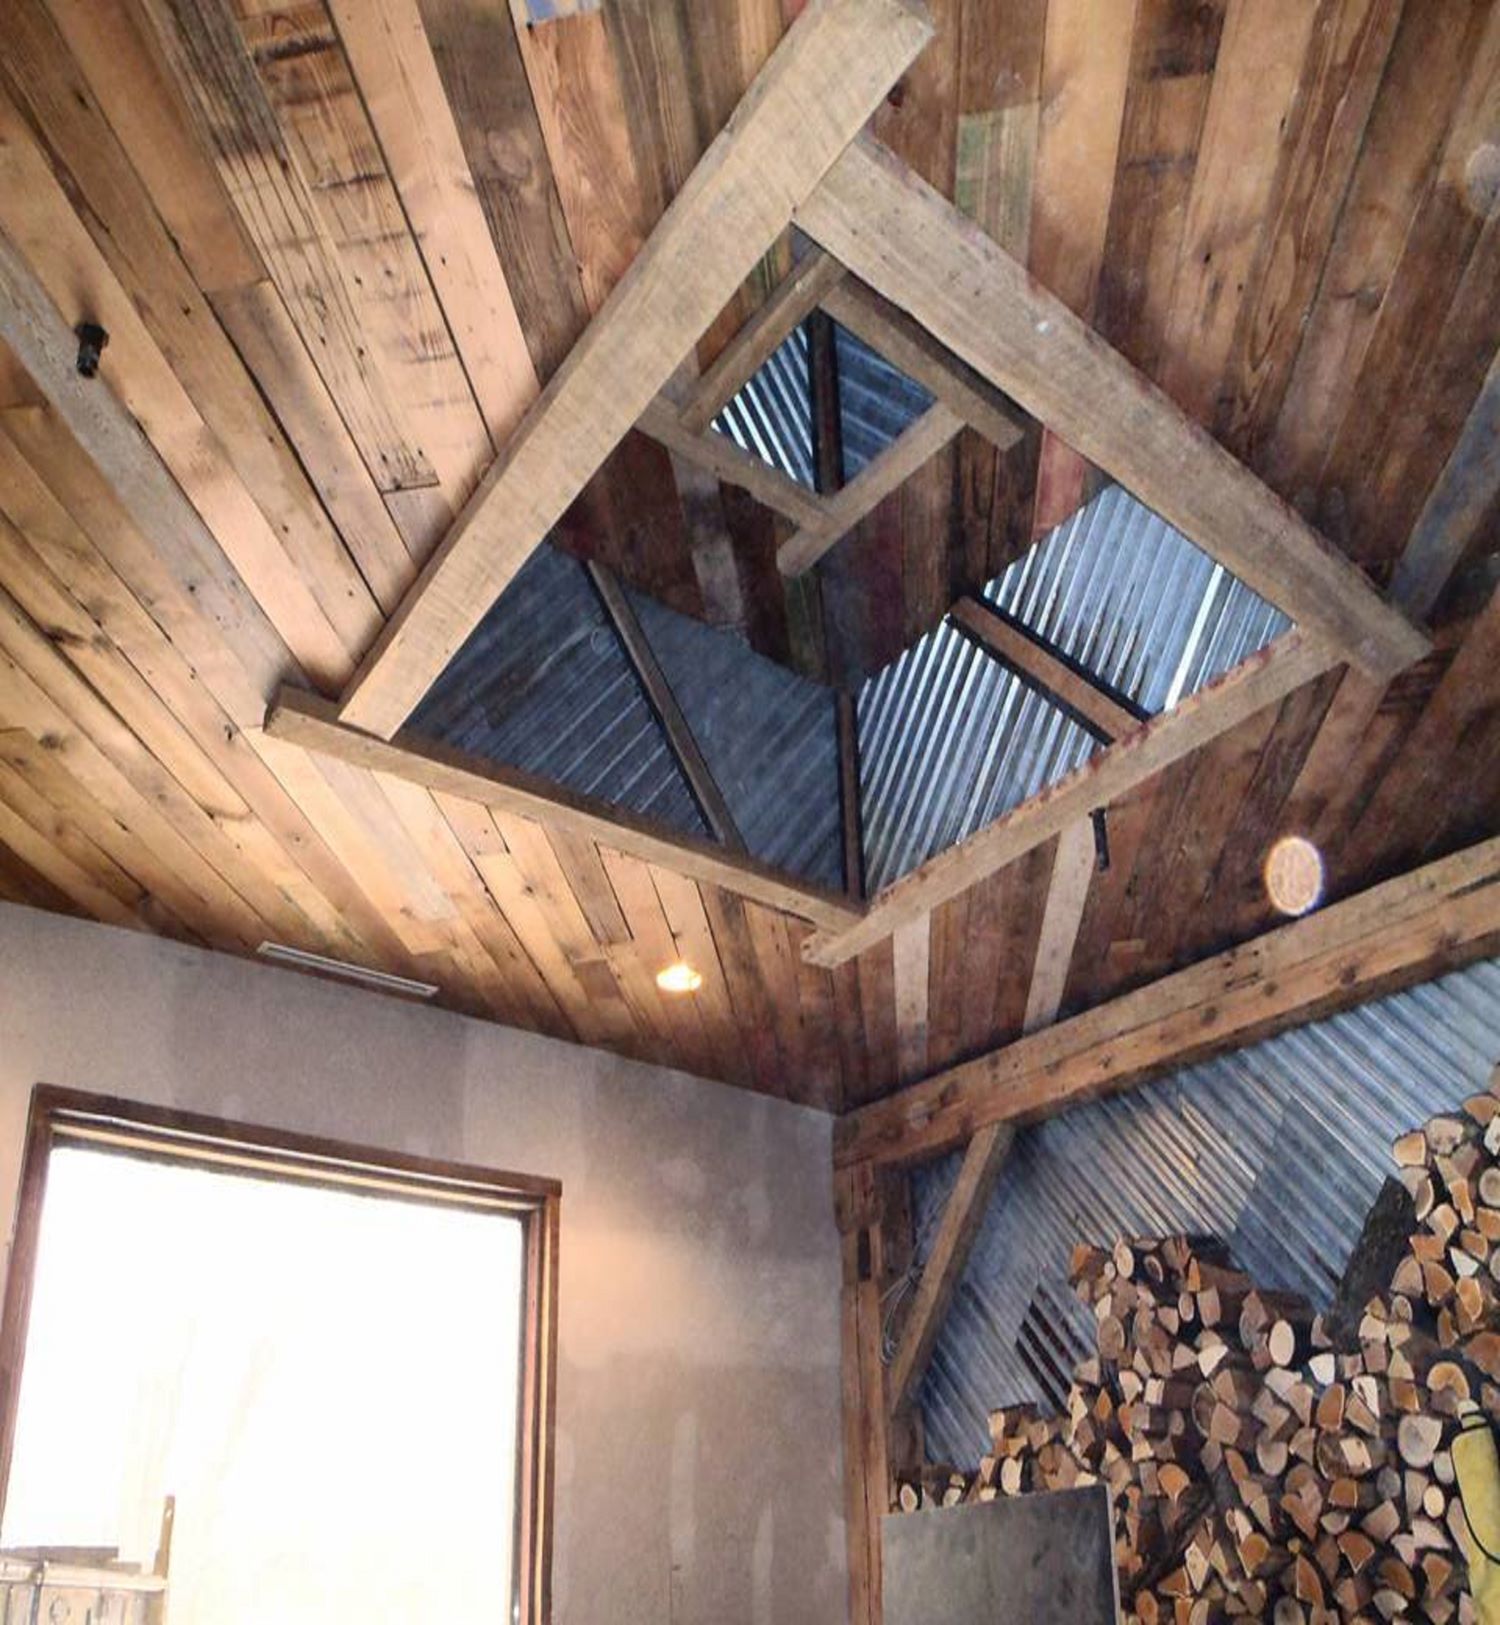 Reclaimed wood ceiling at a barbeque restaurant